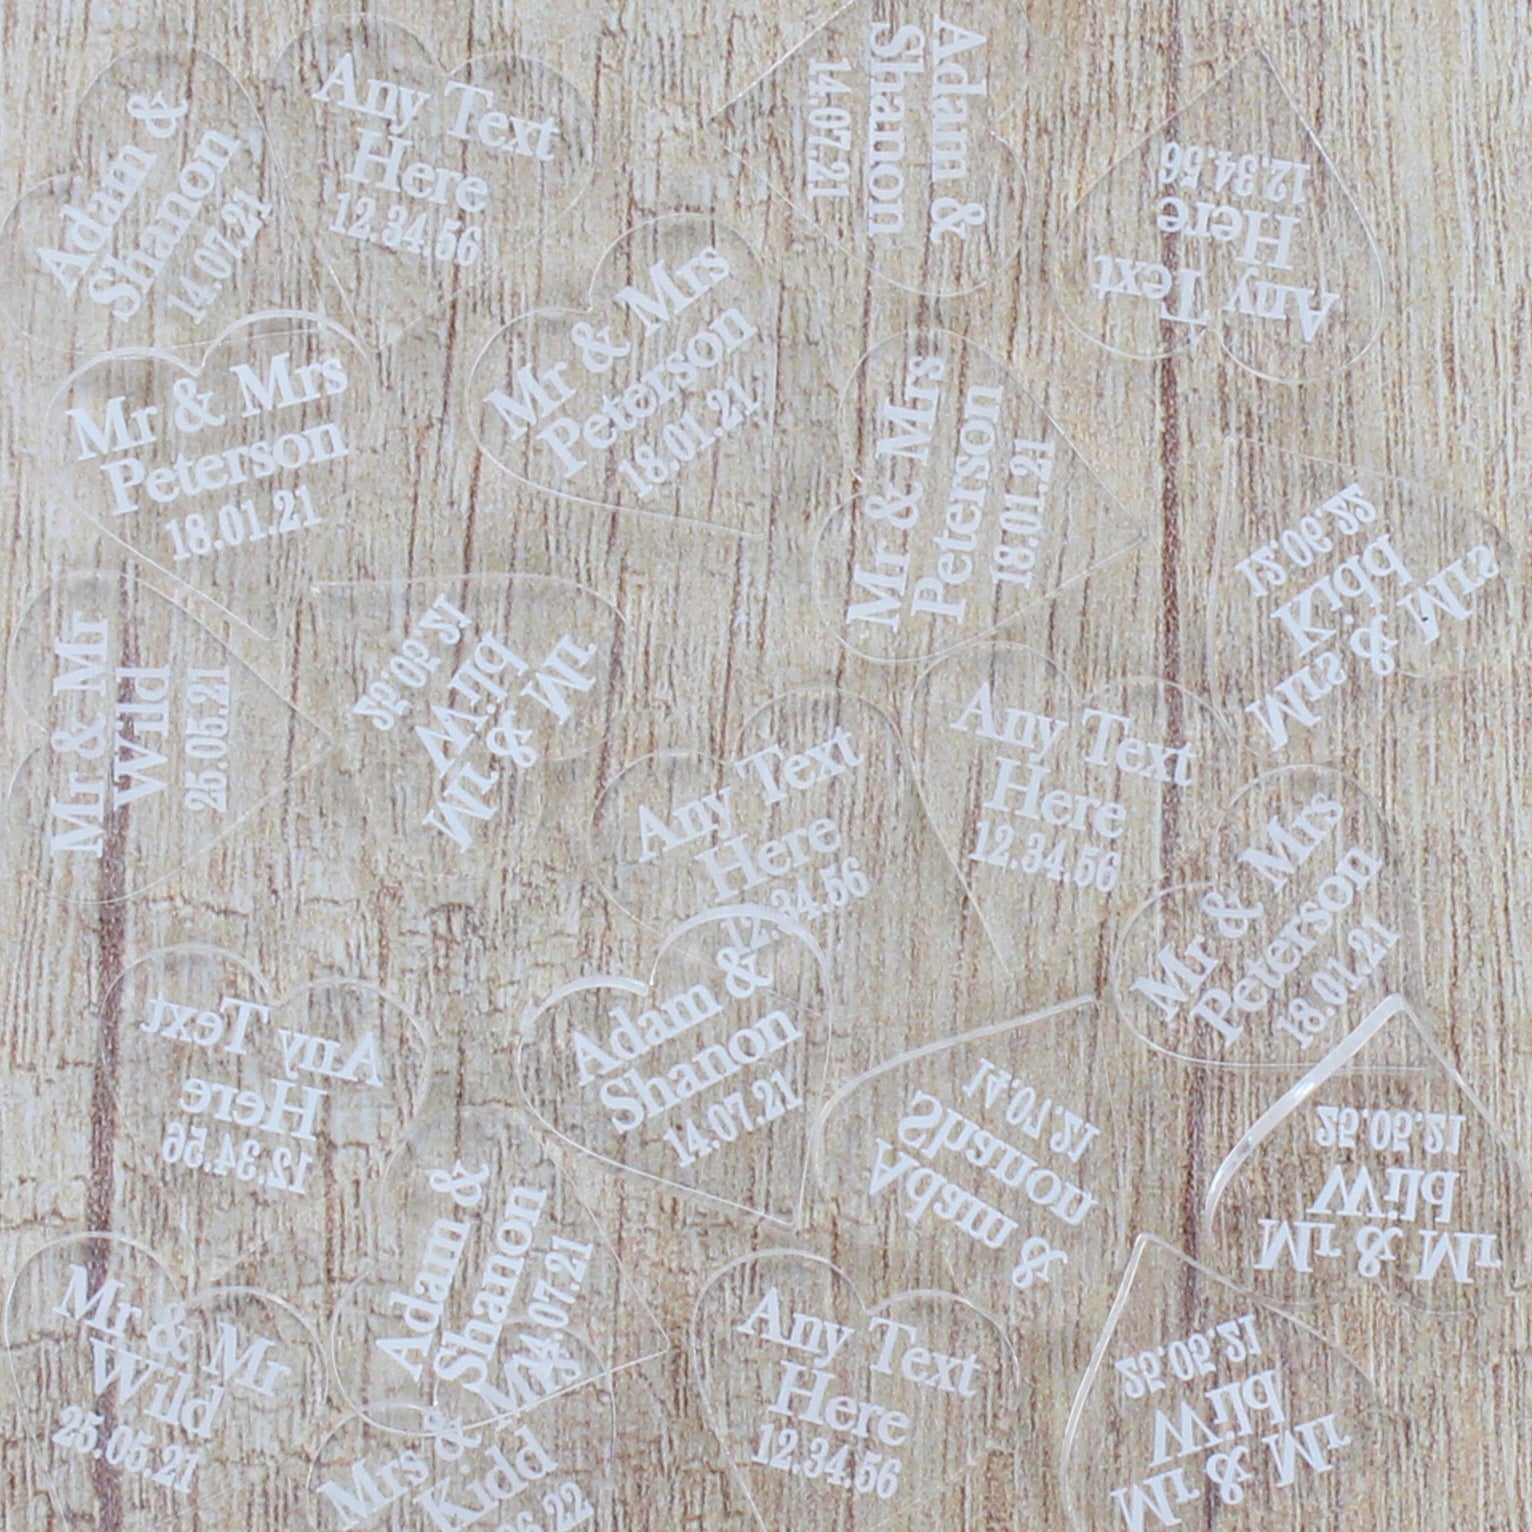 Personalised Wedding Favours - Clear Acrylic Love Hearts